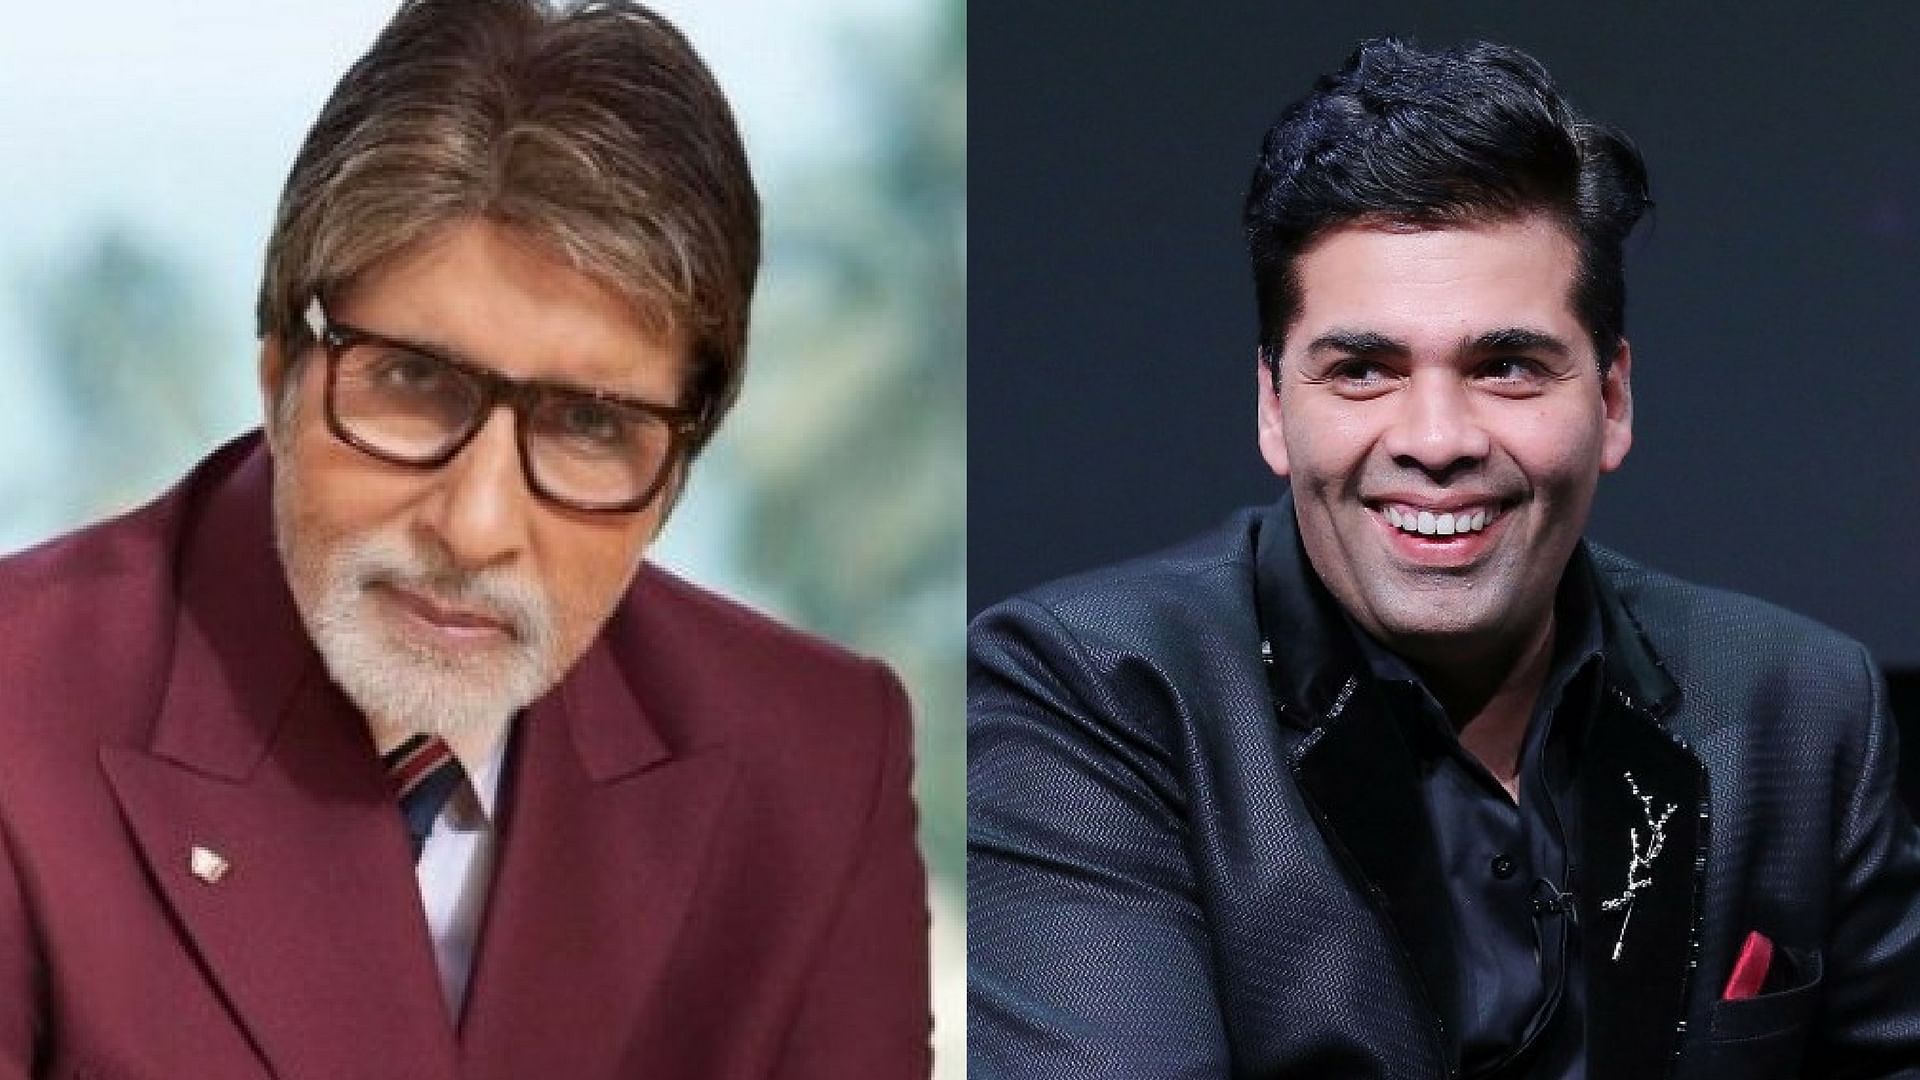 Amitabh Bachchan and Karan Johar are taking to Twitter to talk about the rains.